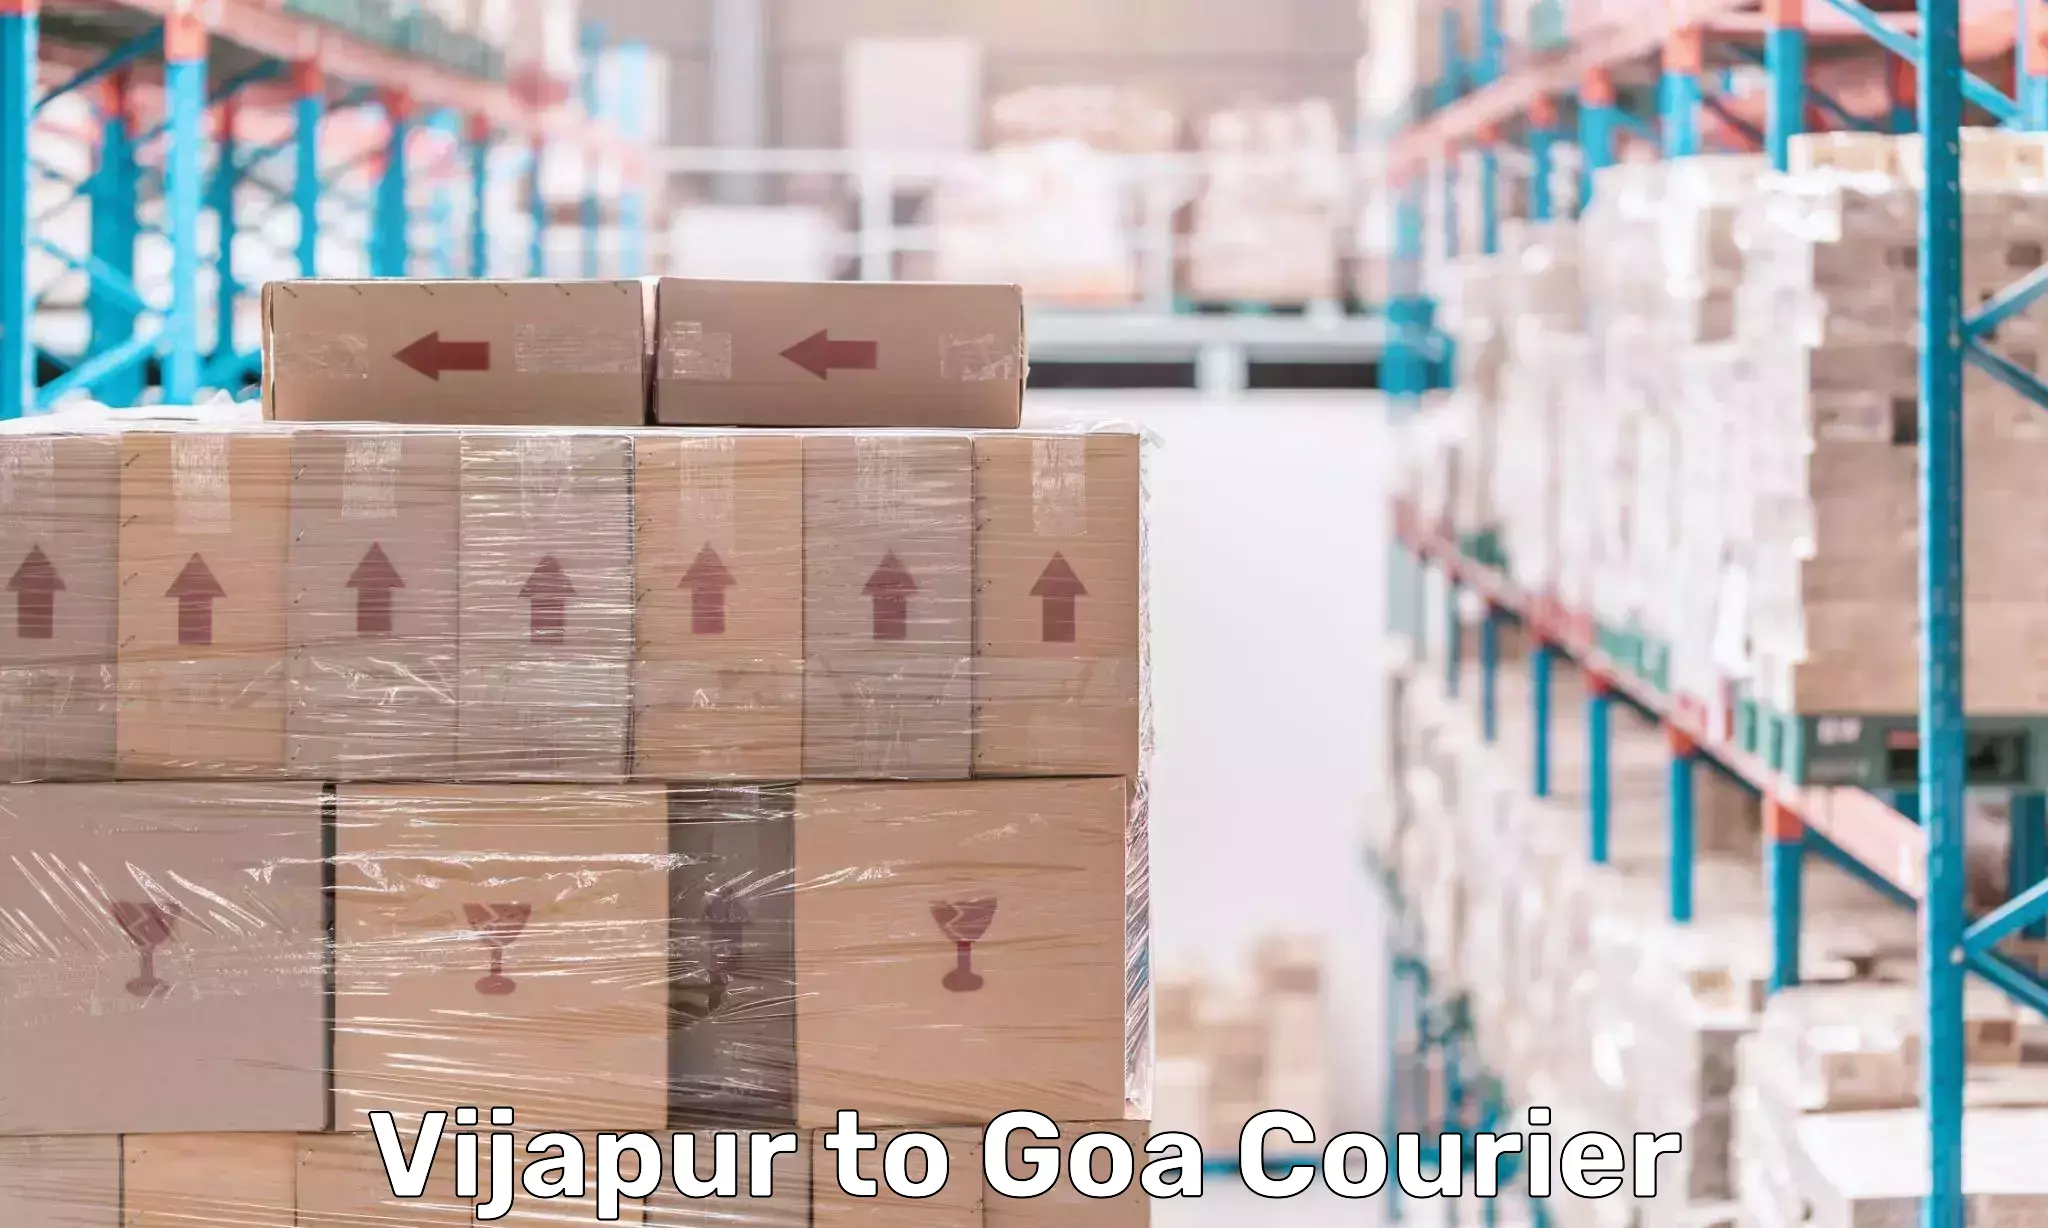 Courier service innovation in Vijapur to Goa